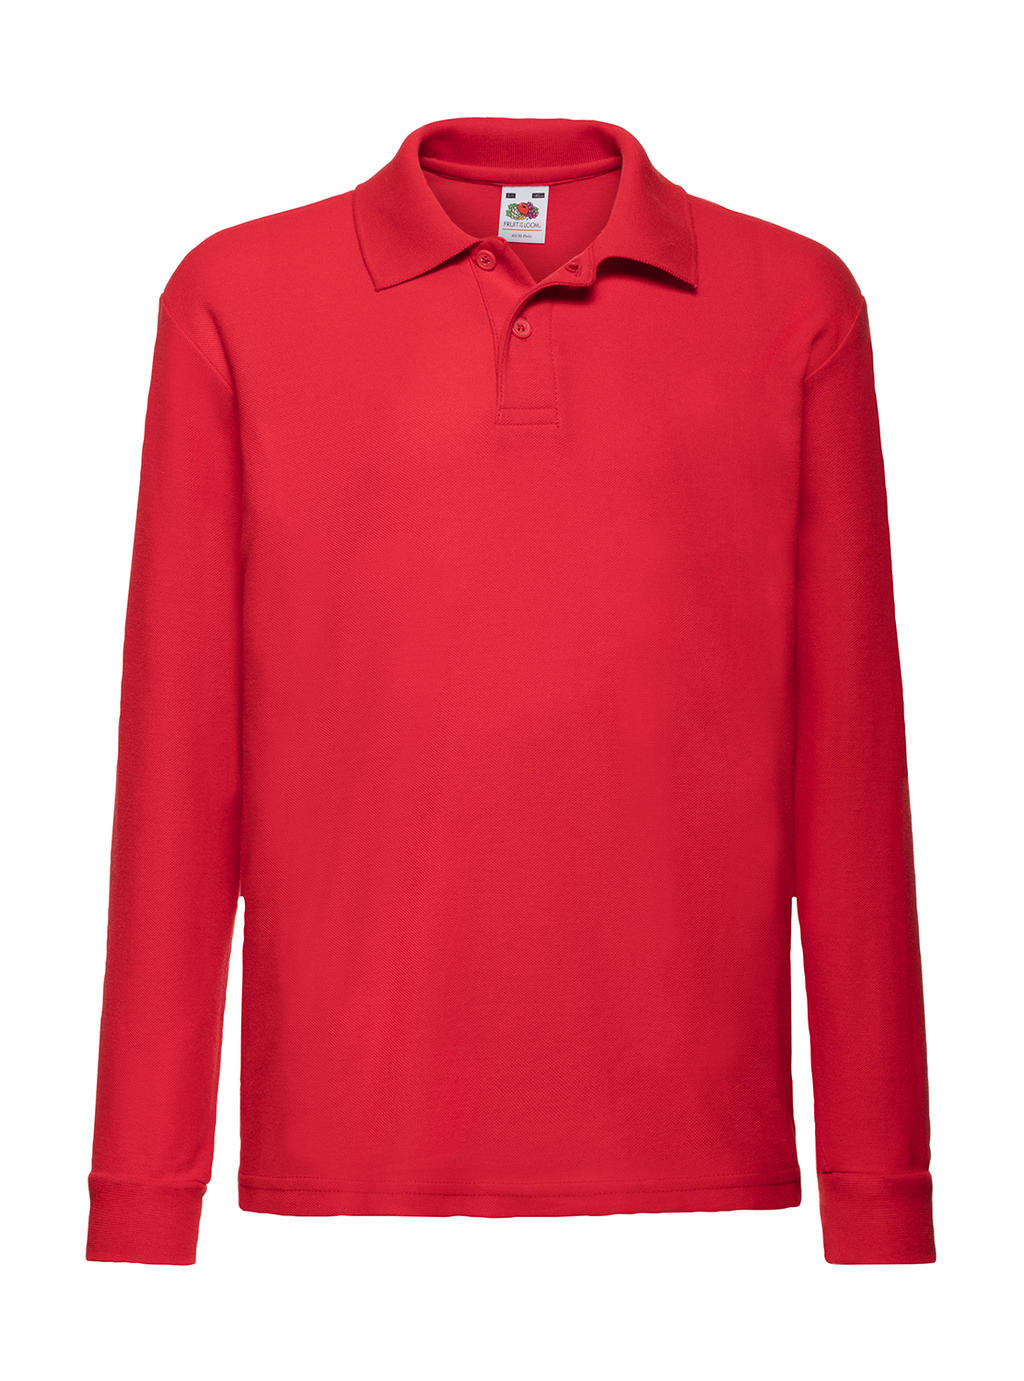  Kids 65/35 Long Sleeve Polo in Farbe Red